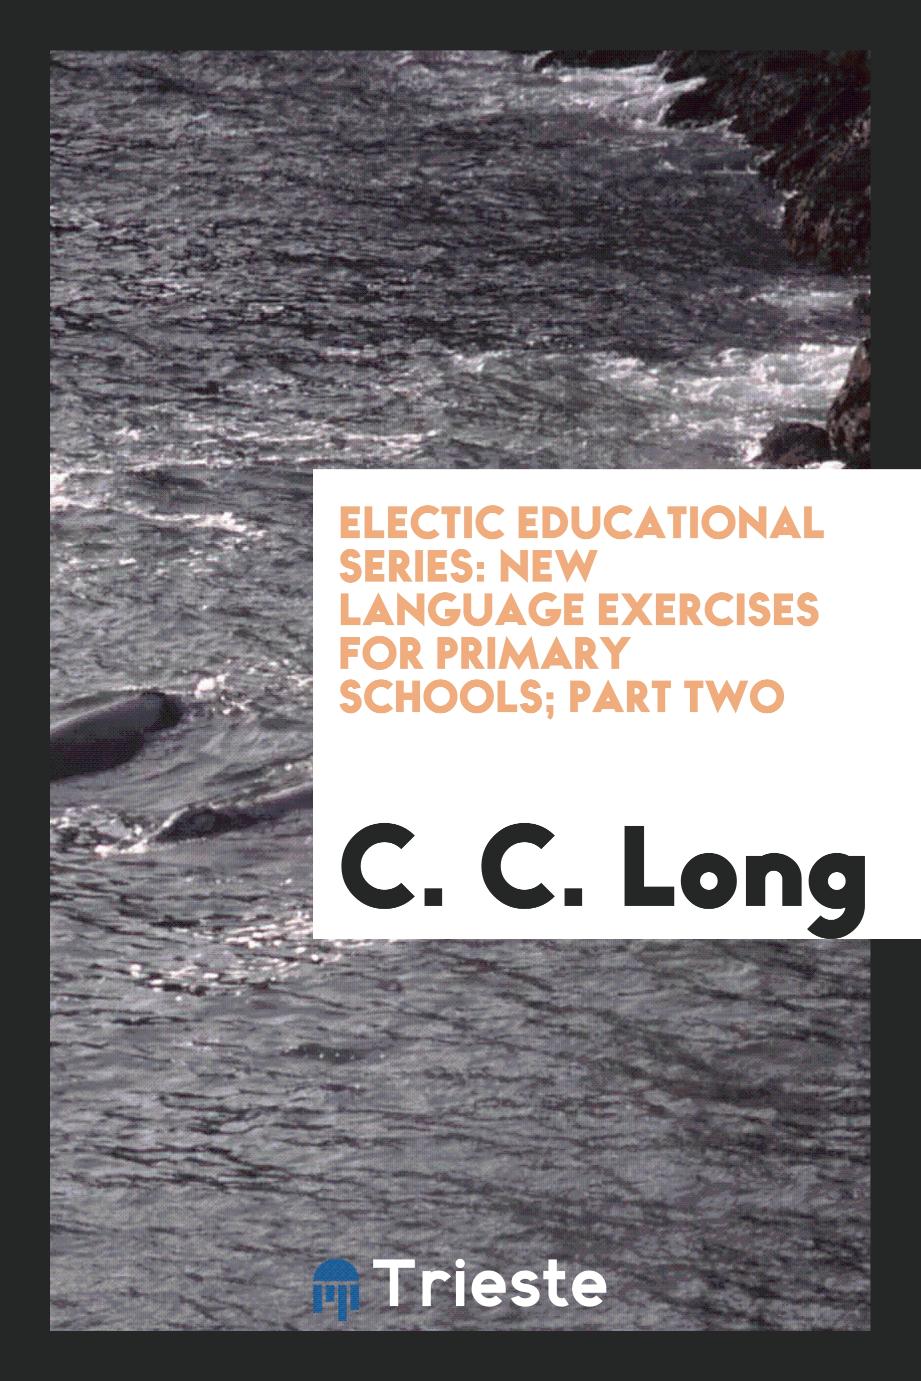 Electic Educational Series: New Language Exercises for Primary Schools; Part Two